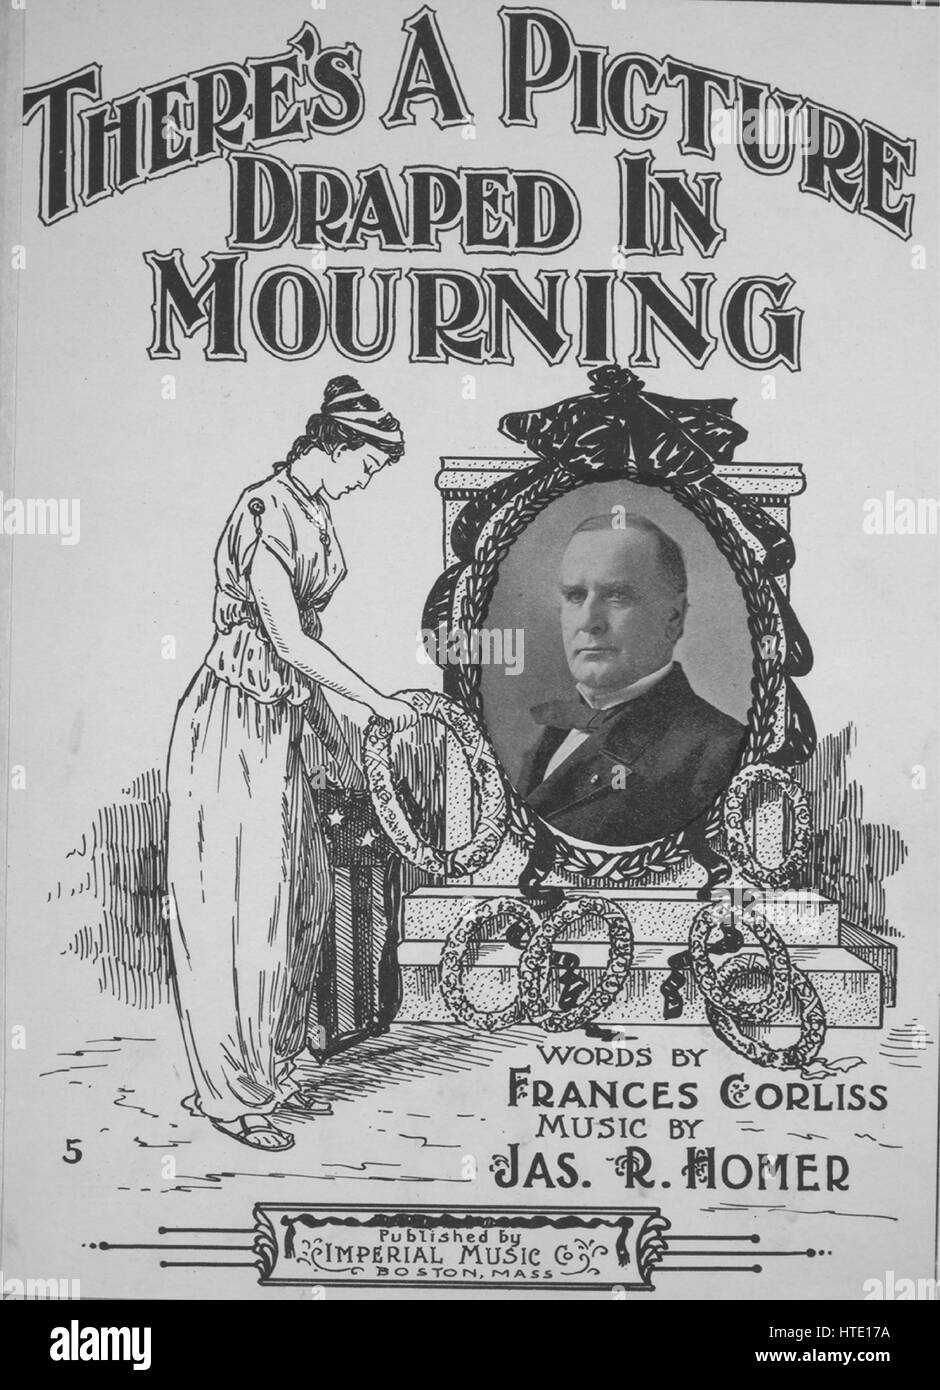 Sheet music cover image of the song 'There's a Picture Draped in Mourning', with original authorship notes reading 'Words by Frances Corliss Music by Jas R Homer', United States, 1901. The publisher is listed as 'Imperial Music Co.', the form of composition is 'strophic with chorus', the instrumentation is 'piano and voice', the first line reads 'The President of the Grand Nation In the land of the free and the brave', and the illustration artist is listed as 'C.F.W. Schlimper 13 West St. Boston Mass.'. Stock Photo